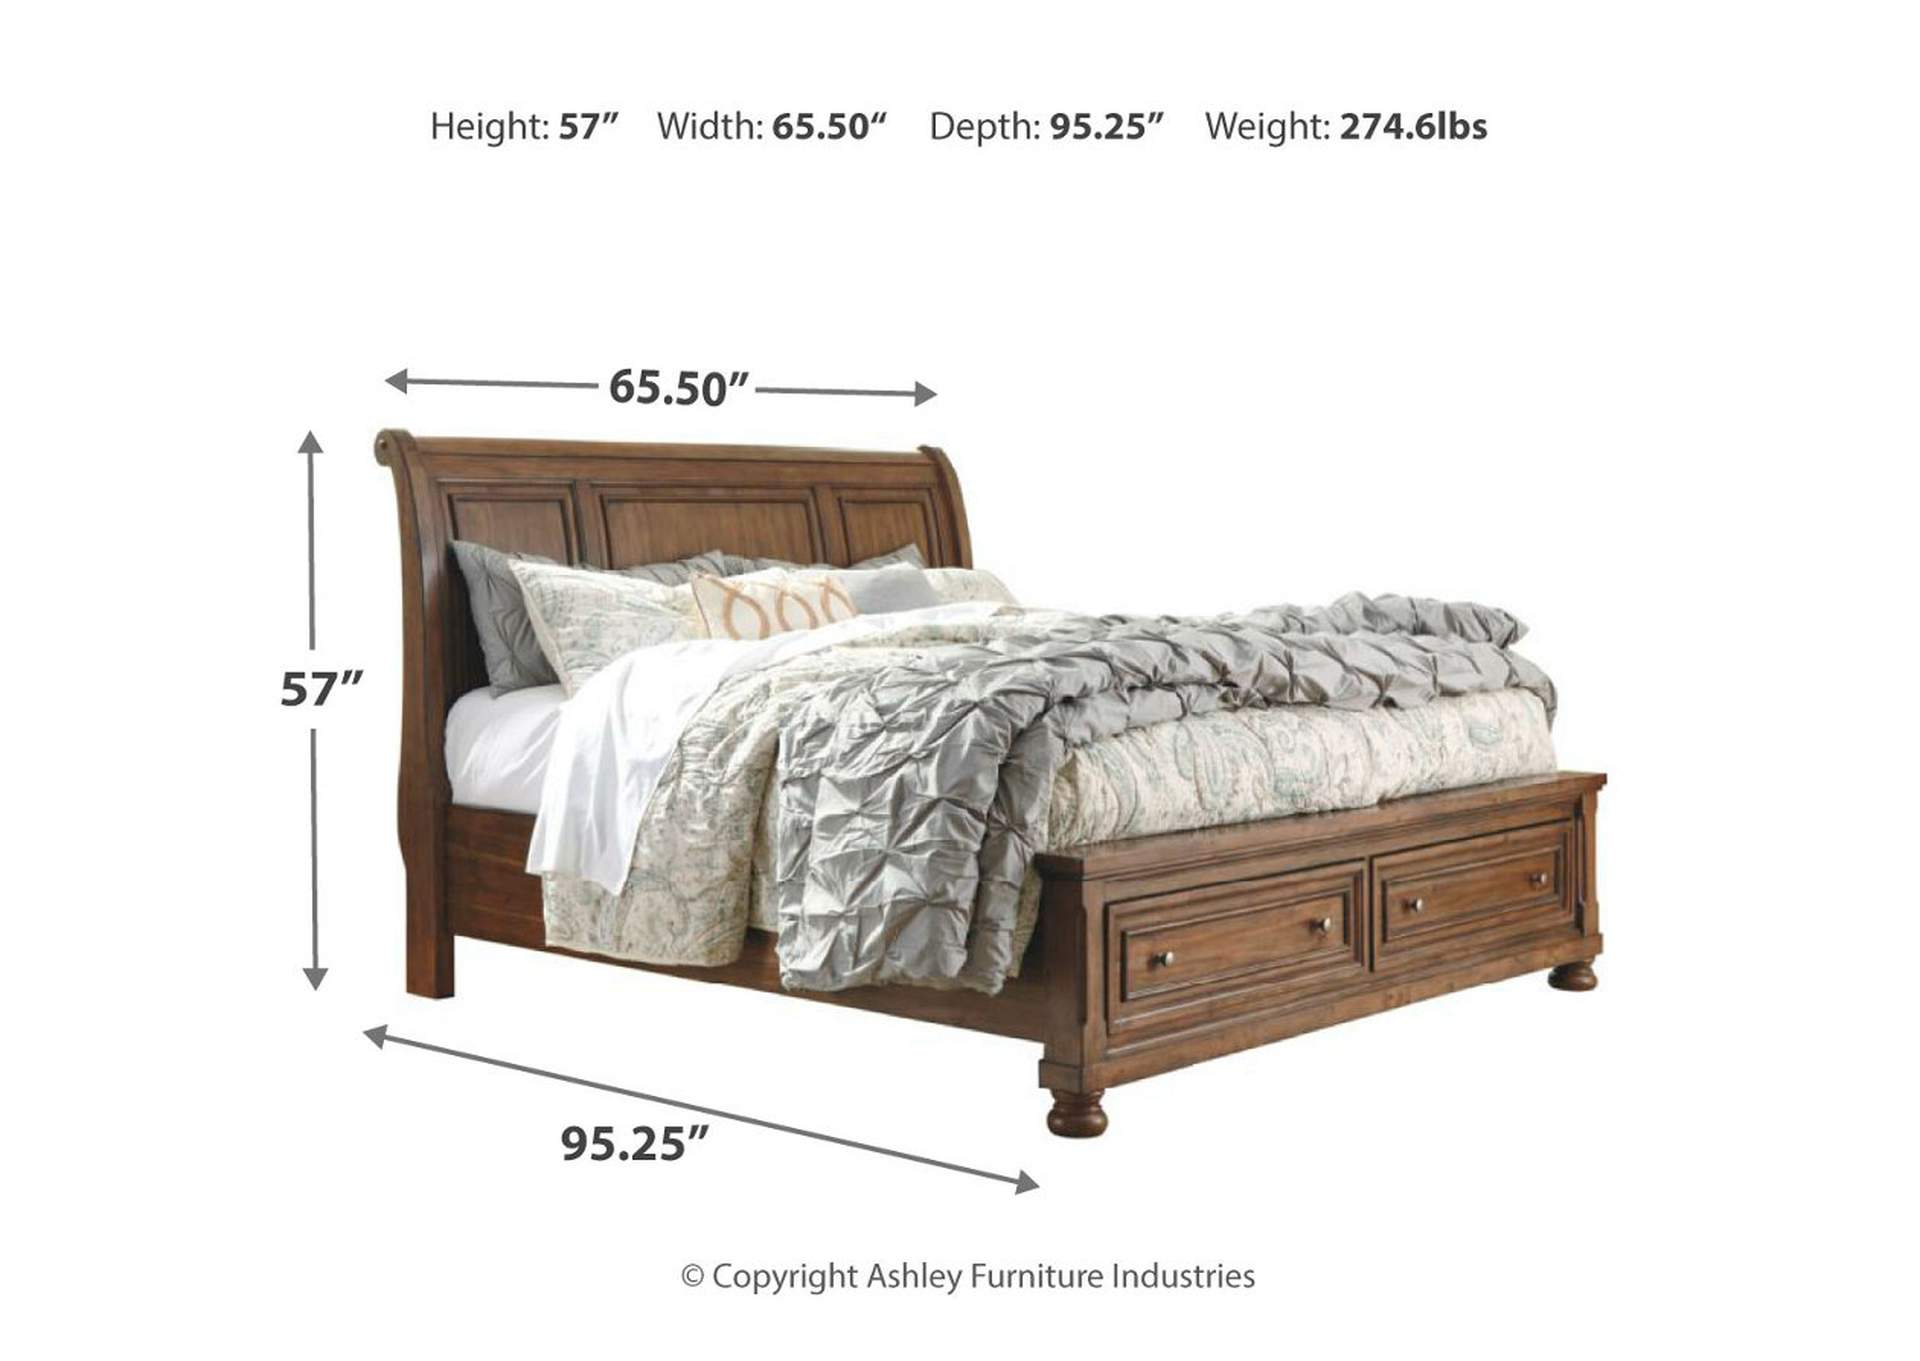 Flynnter Queen Sleigh Bed with 2 Storage Drawers with Dresser with Dresser,Signature Design By Ashley